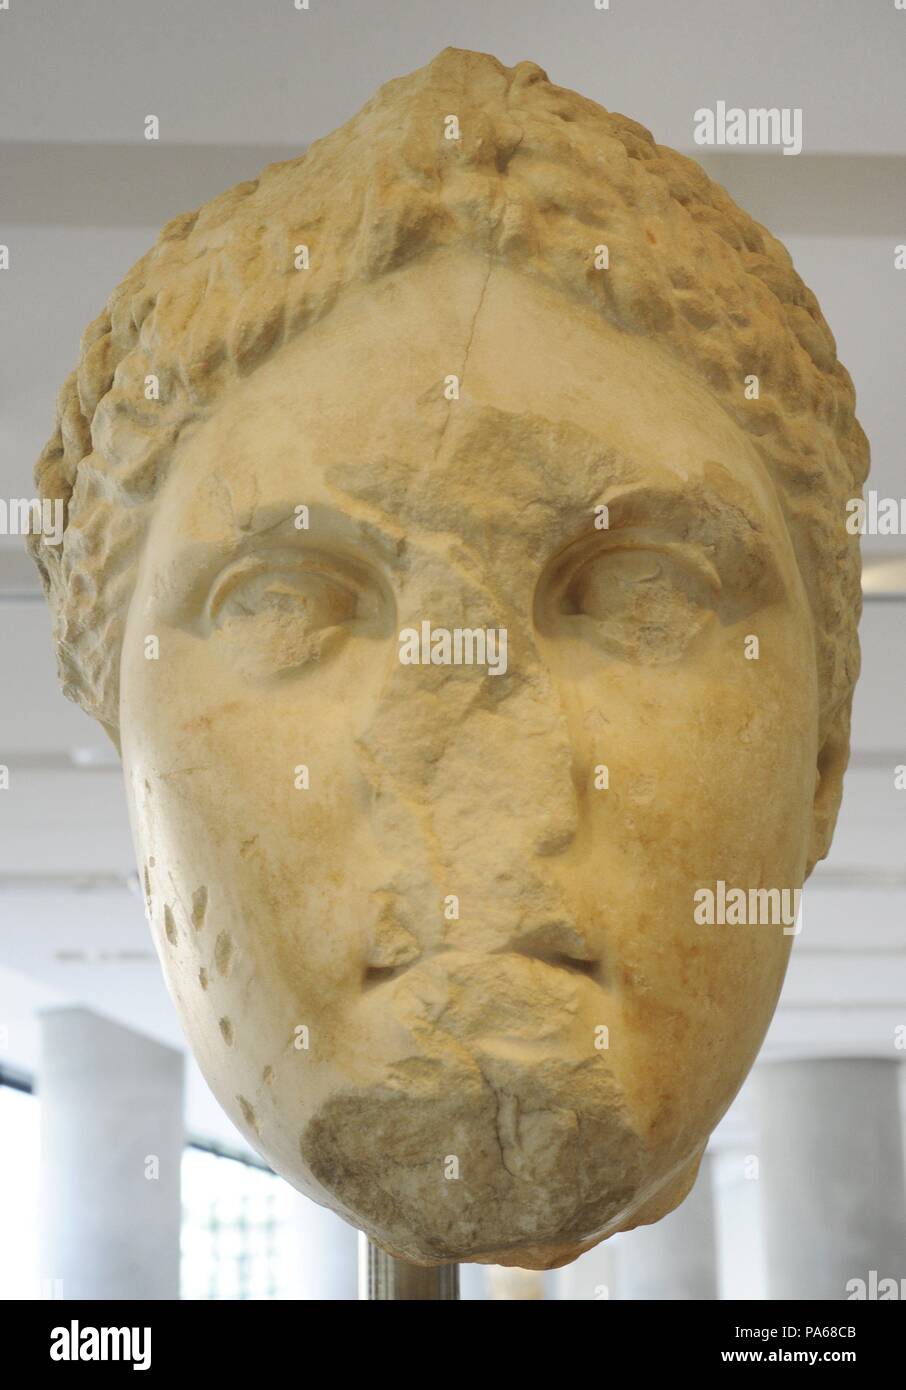 Artemis Brauronia. The head of the cult statue of the Goddess, the work of the sculptor Praxiteles. It was erected in her sanctuary on the Acropolis, ca. 330 BC. Acropolis Museum. Athens. Greece. Stock Photo